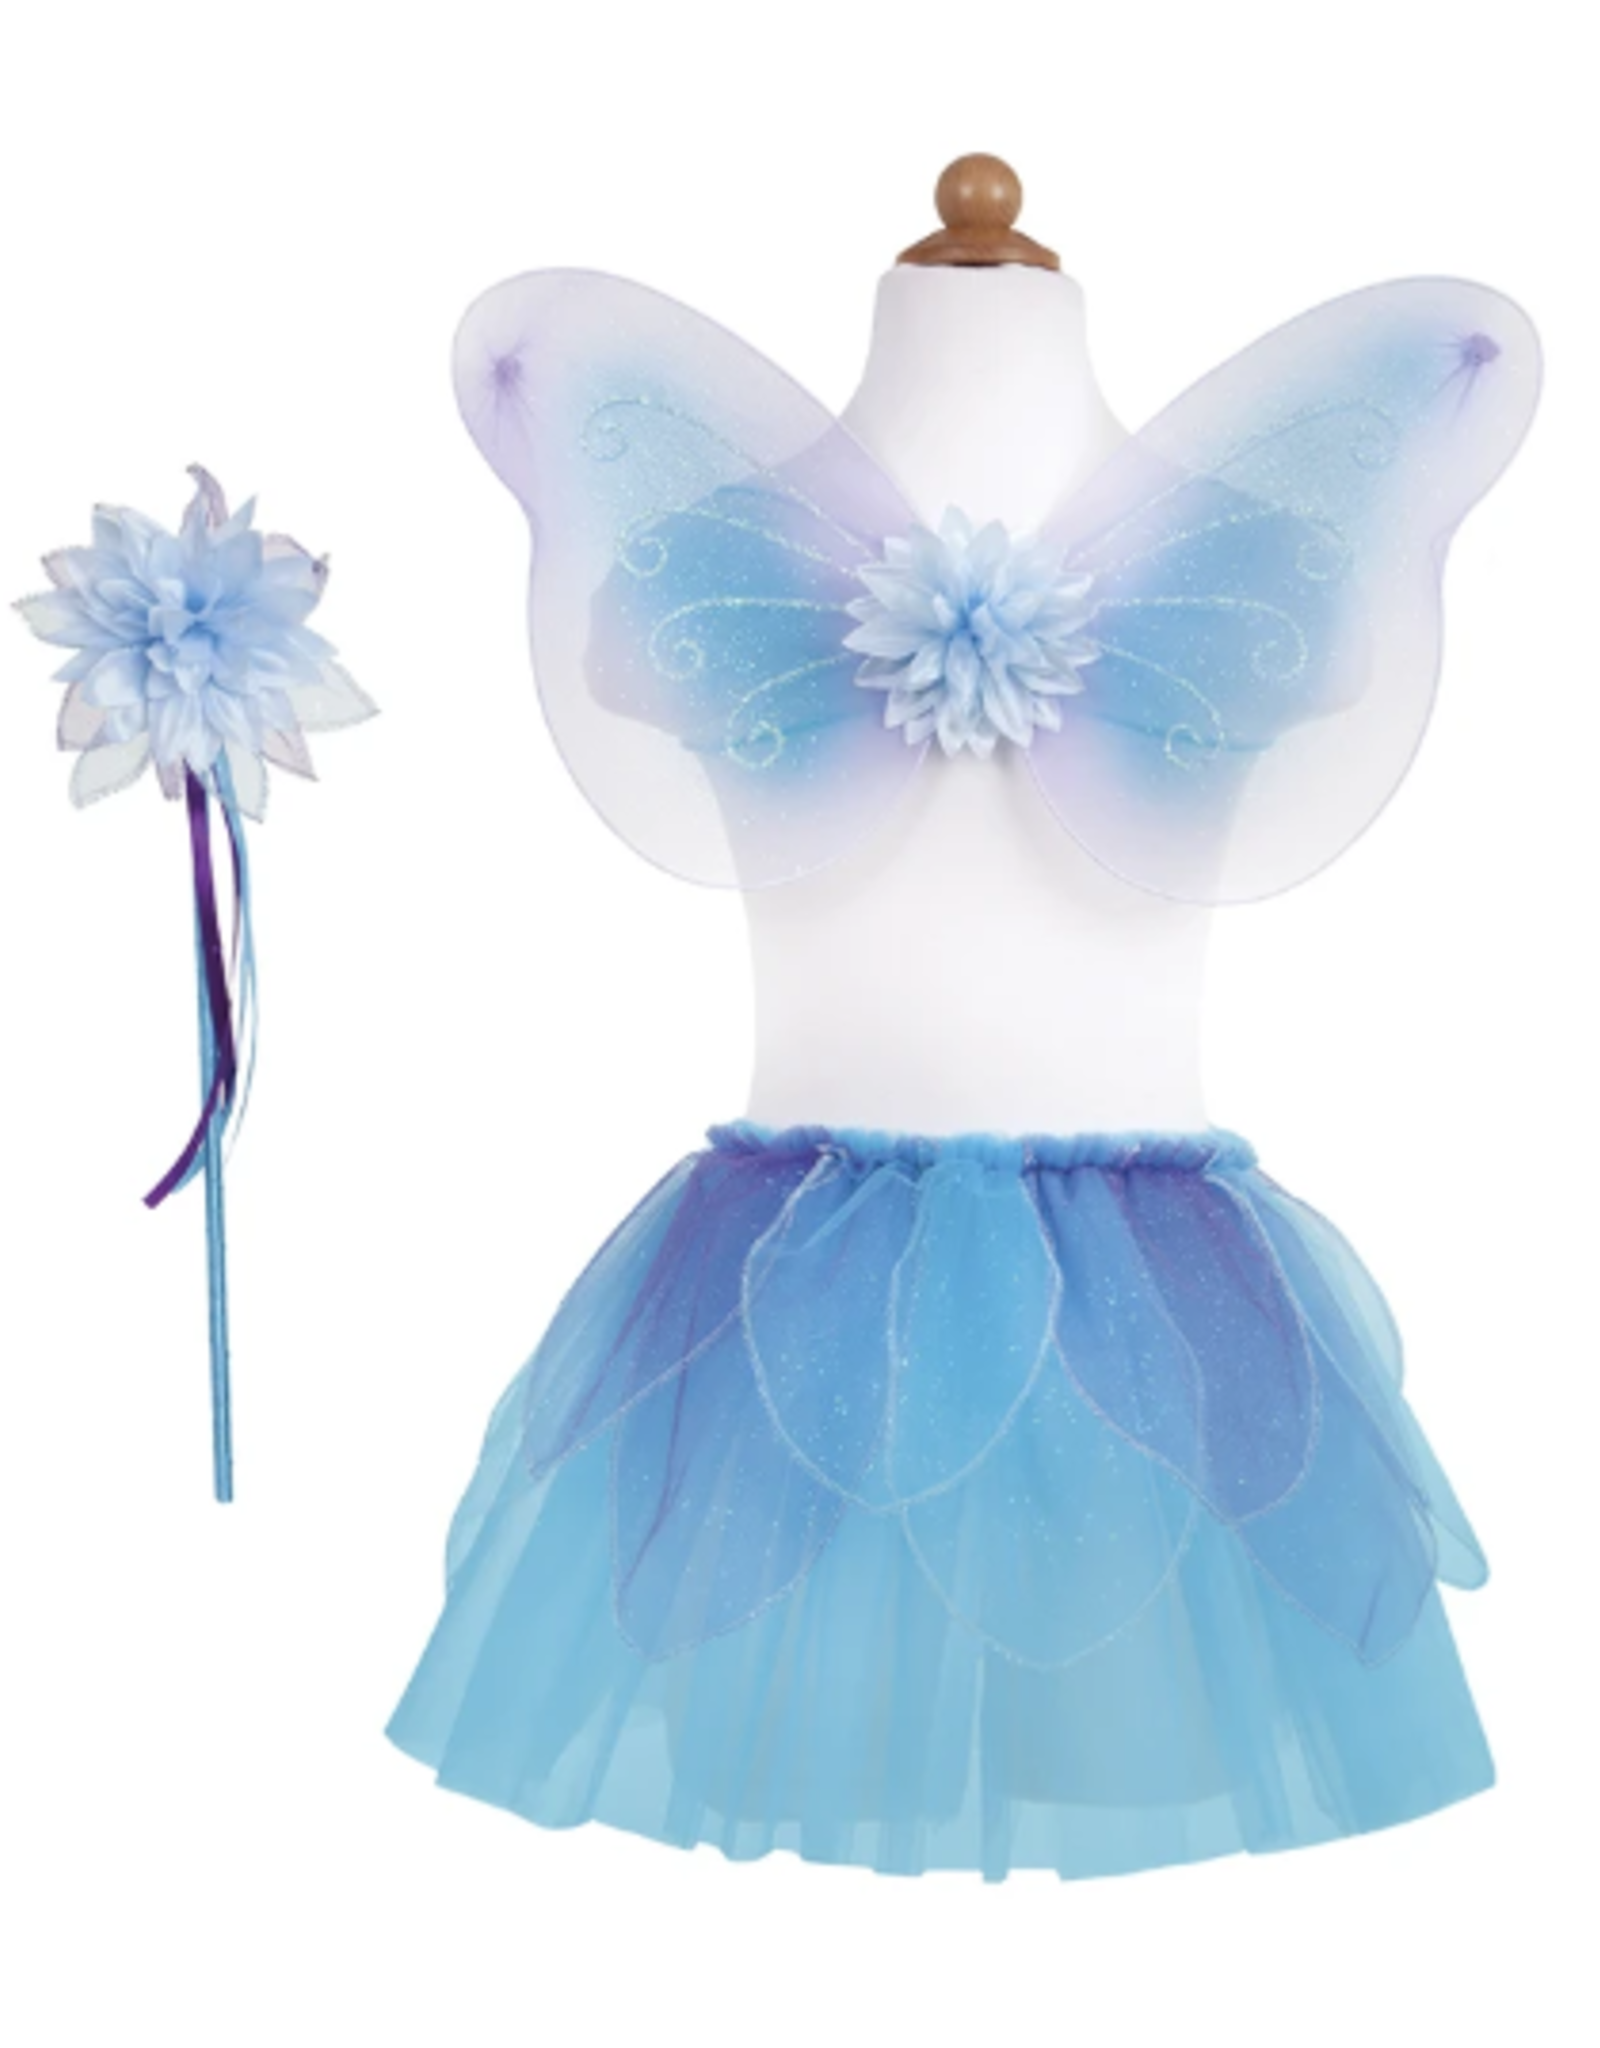 Creative Education Fancy Flutter Skirt w/ Wand and Wings-Blue, size 4-6